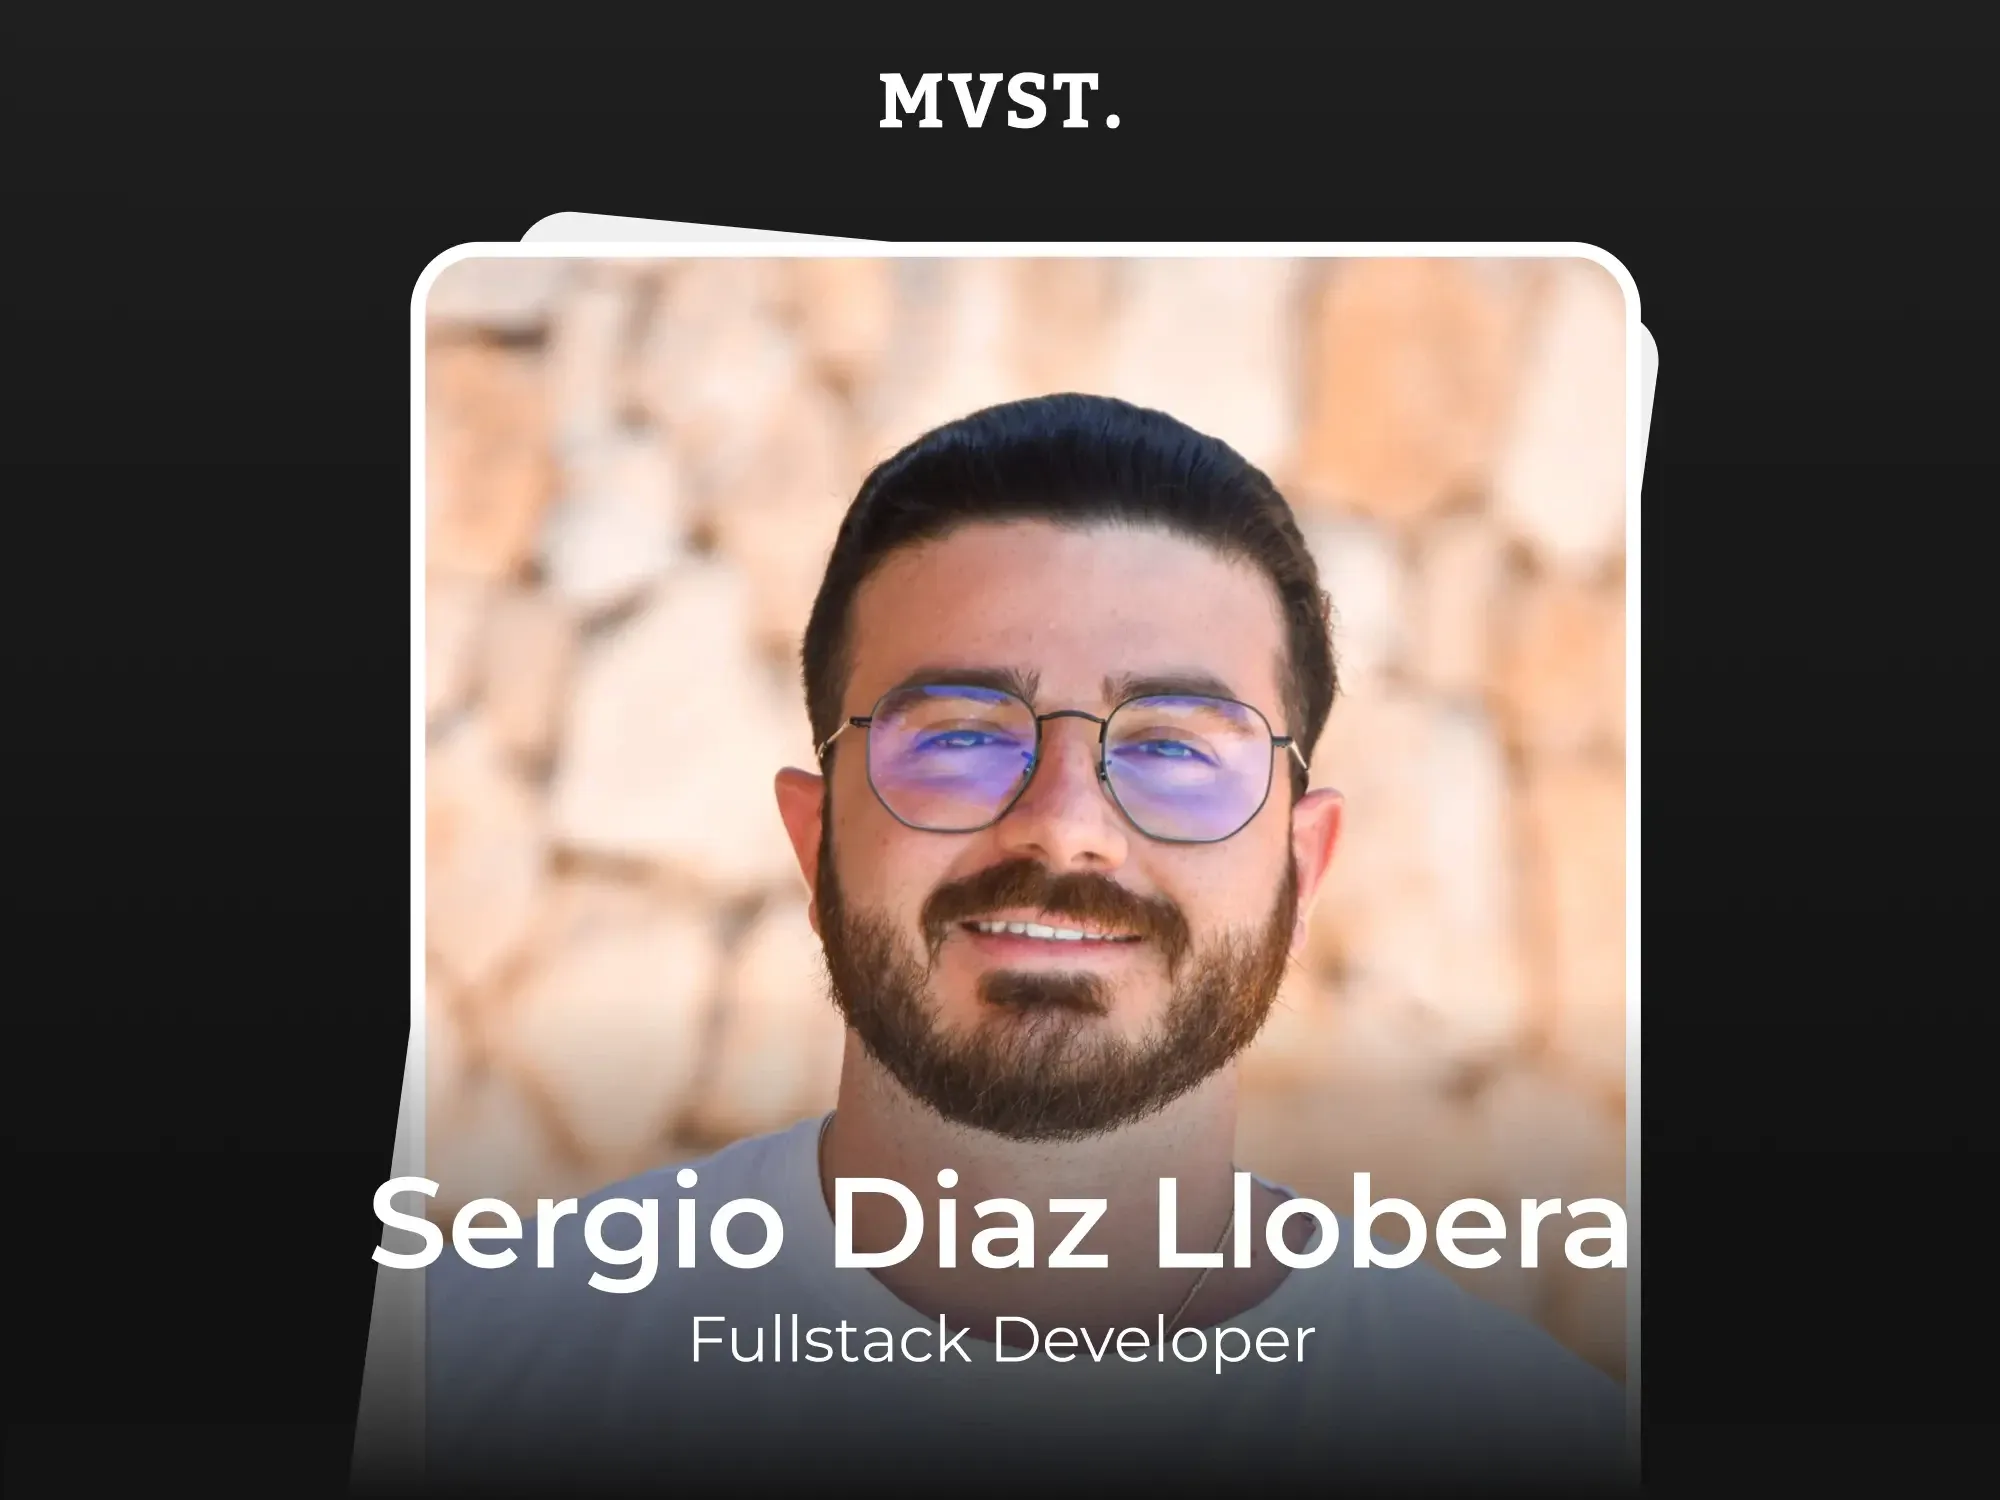 Welcome to MVST, Sergio!